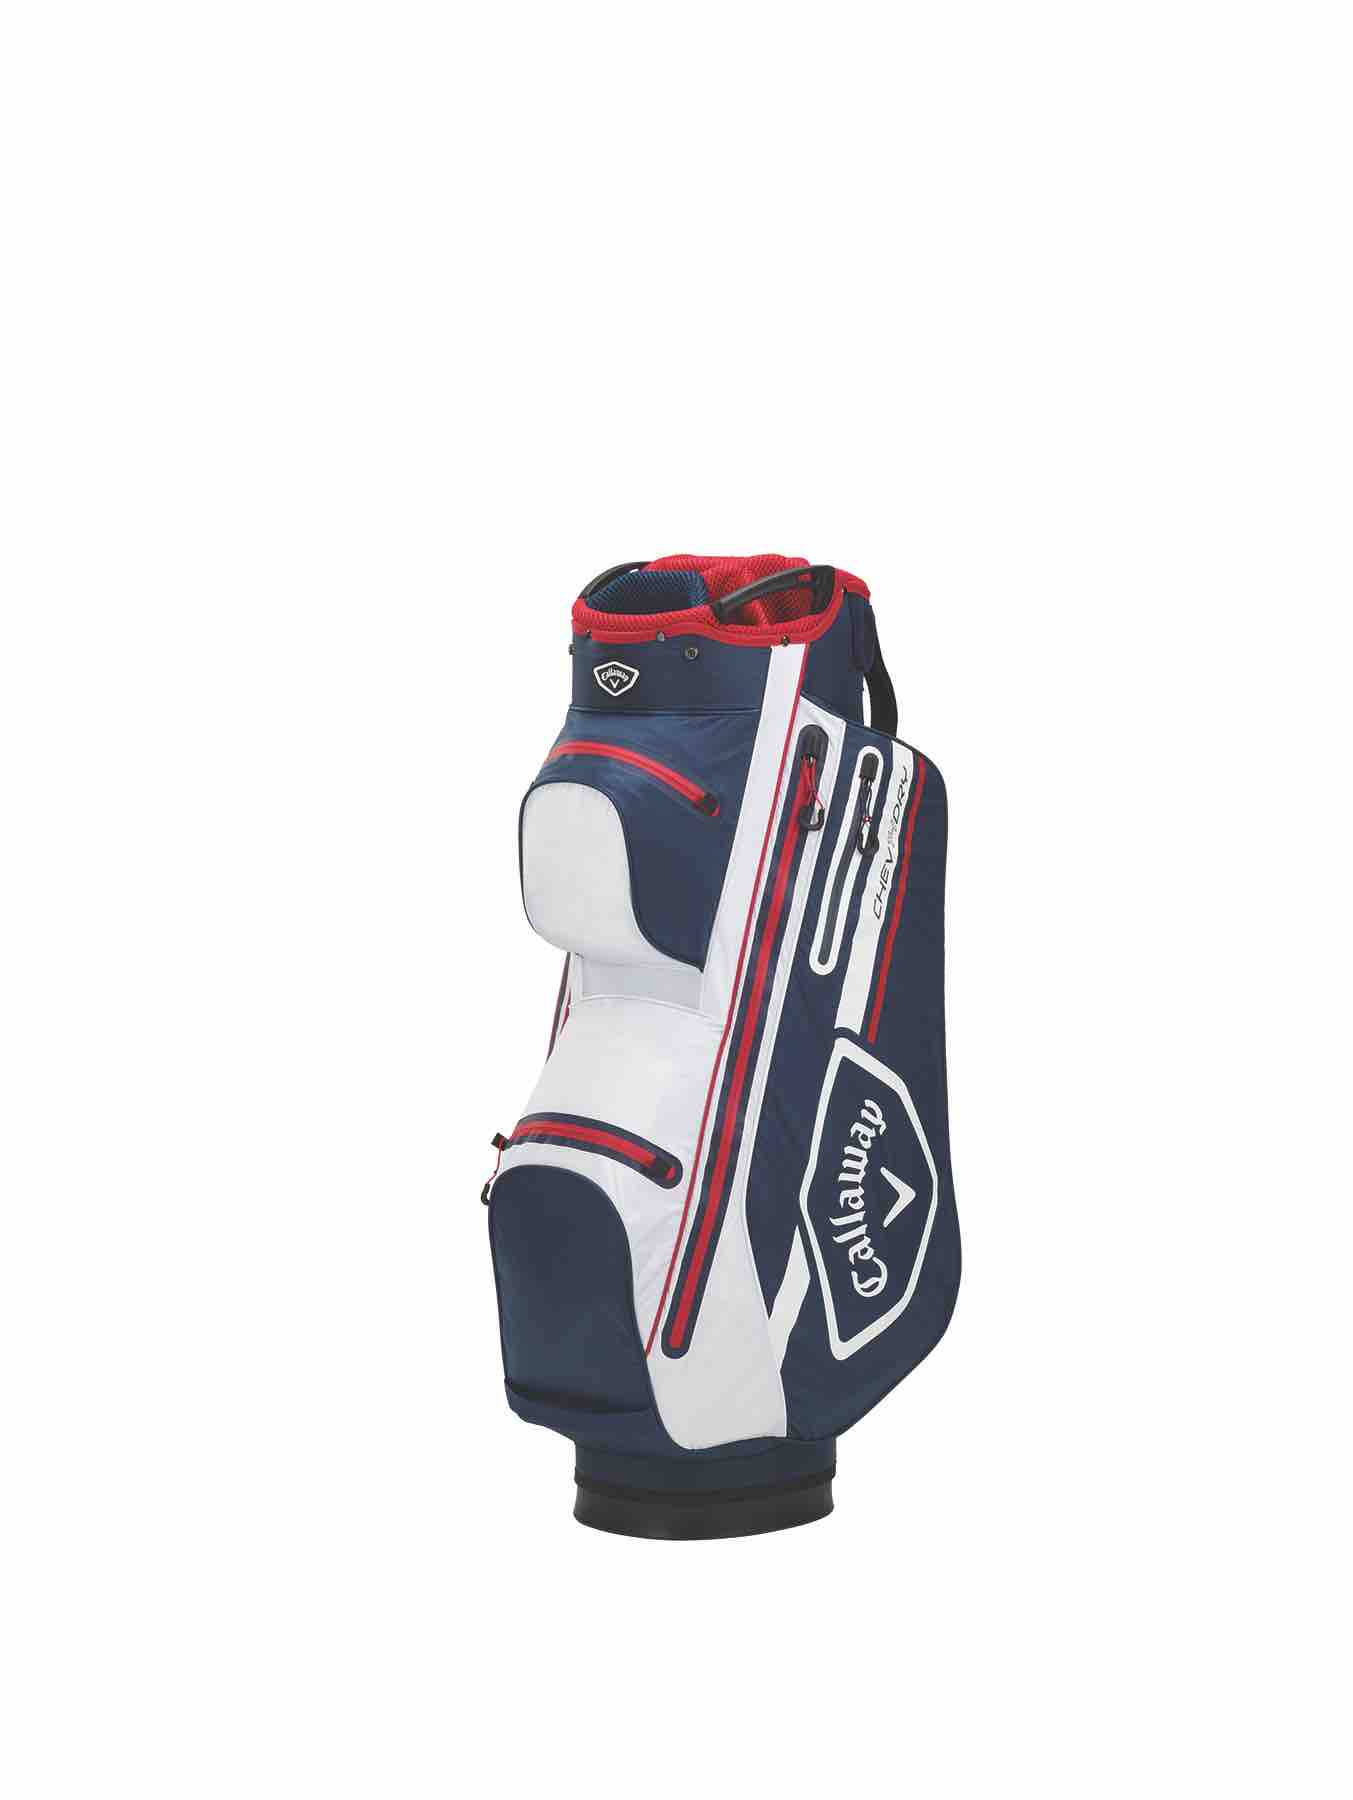 Callaway | Chev Dry 14 | Cartbag | Navy / White / Red